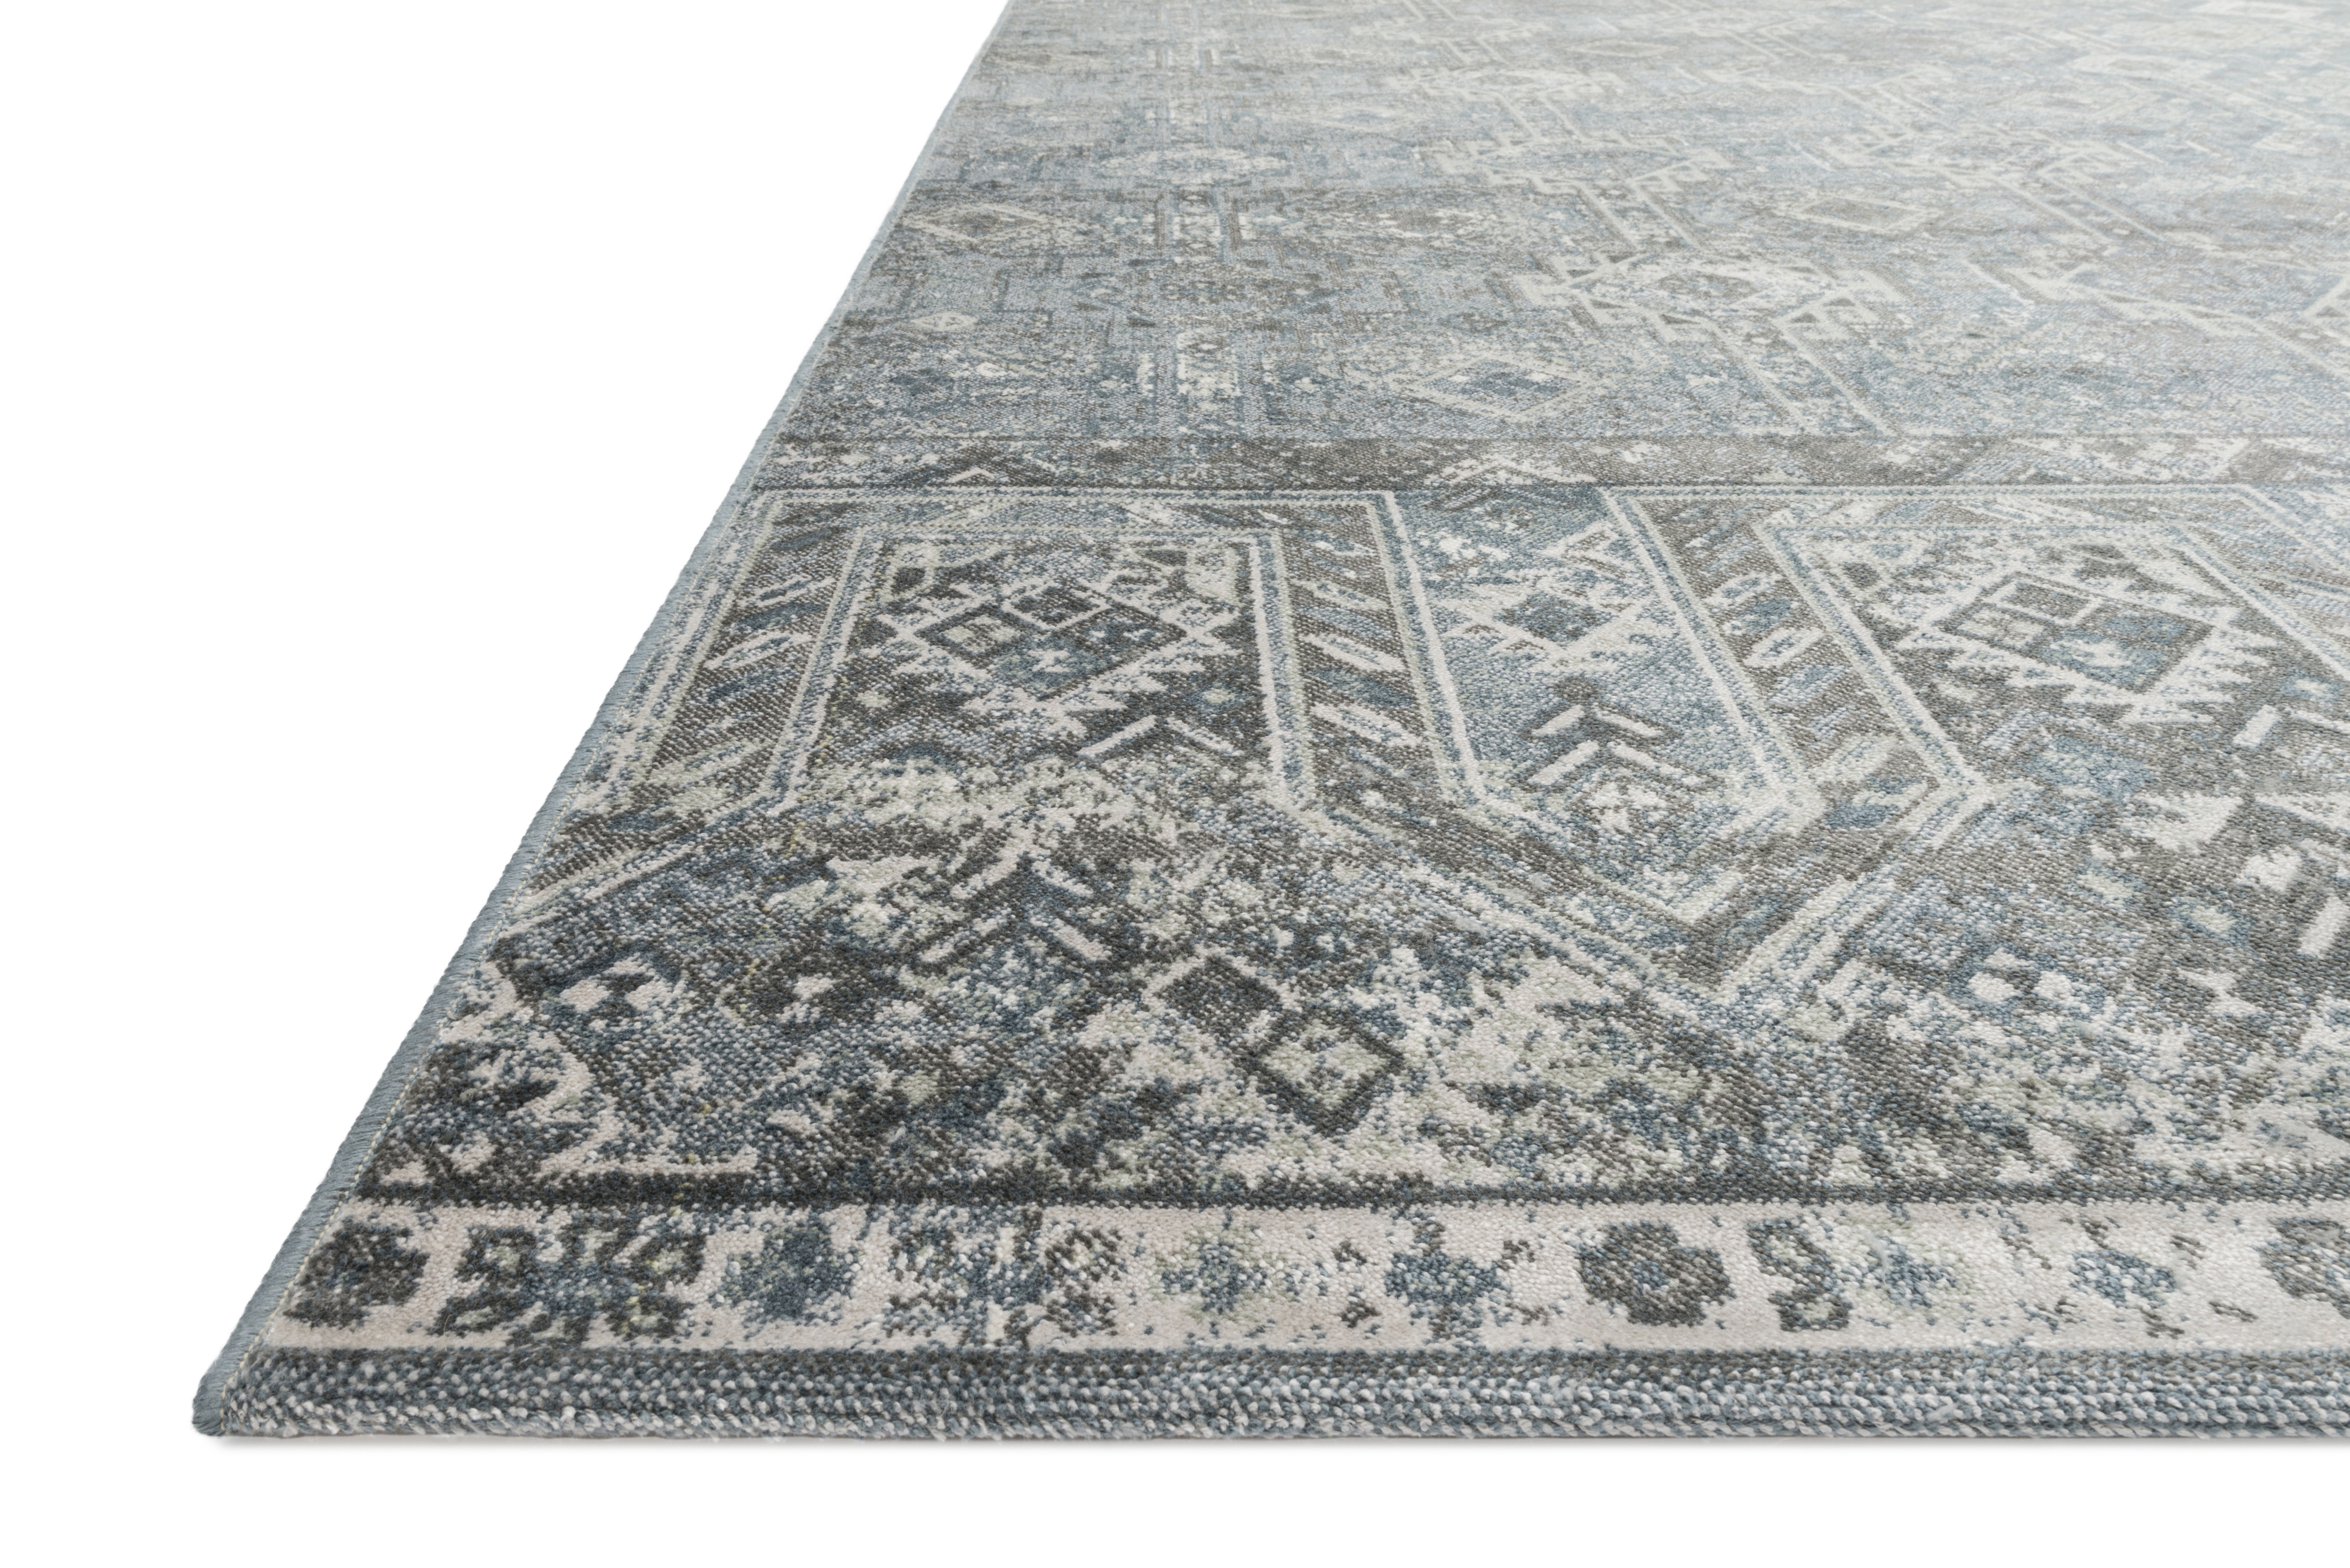 Griffin Rug, 7'6" x 10'5", Gray & Blue - Image 1